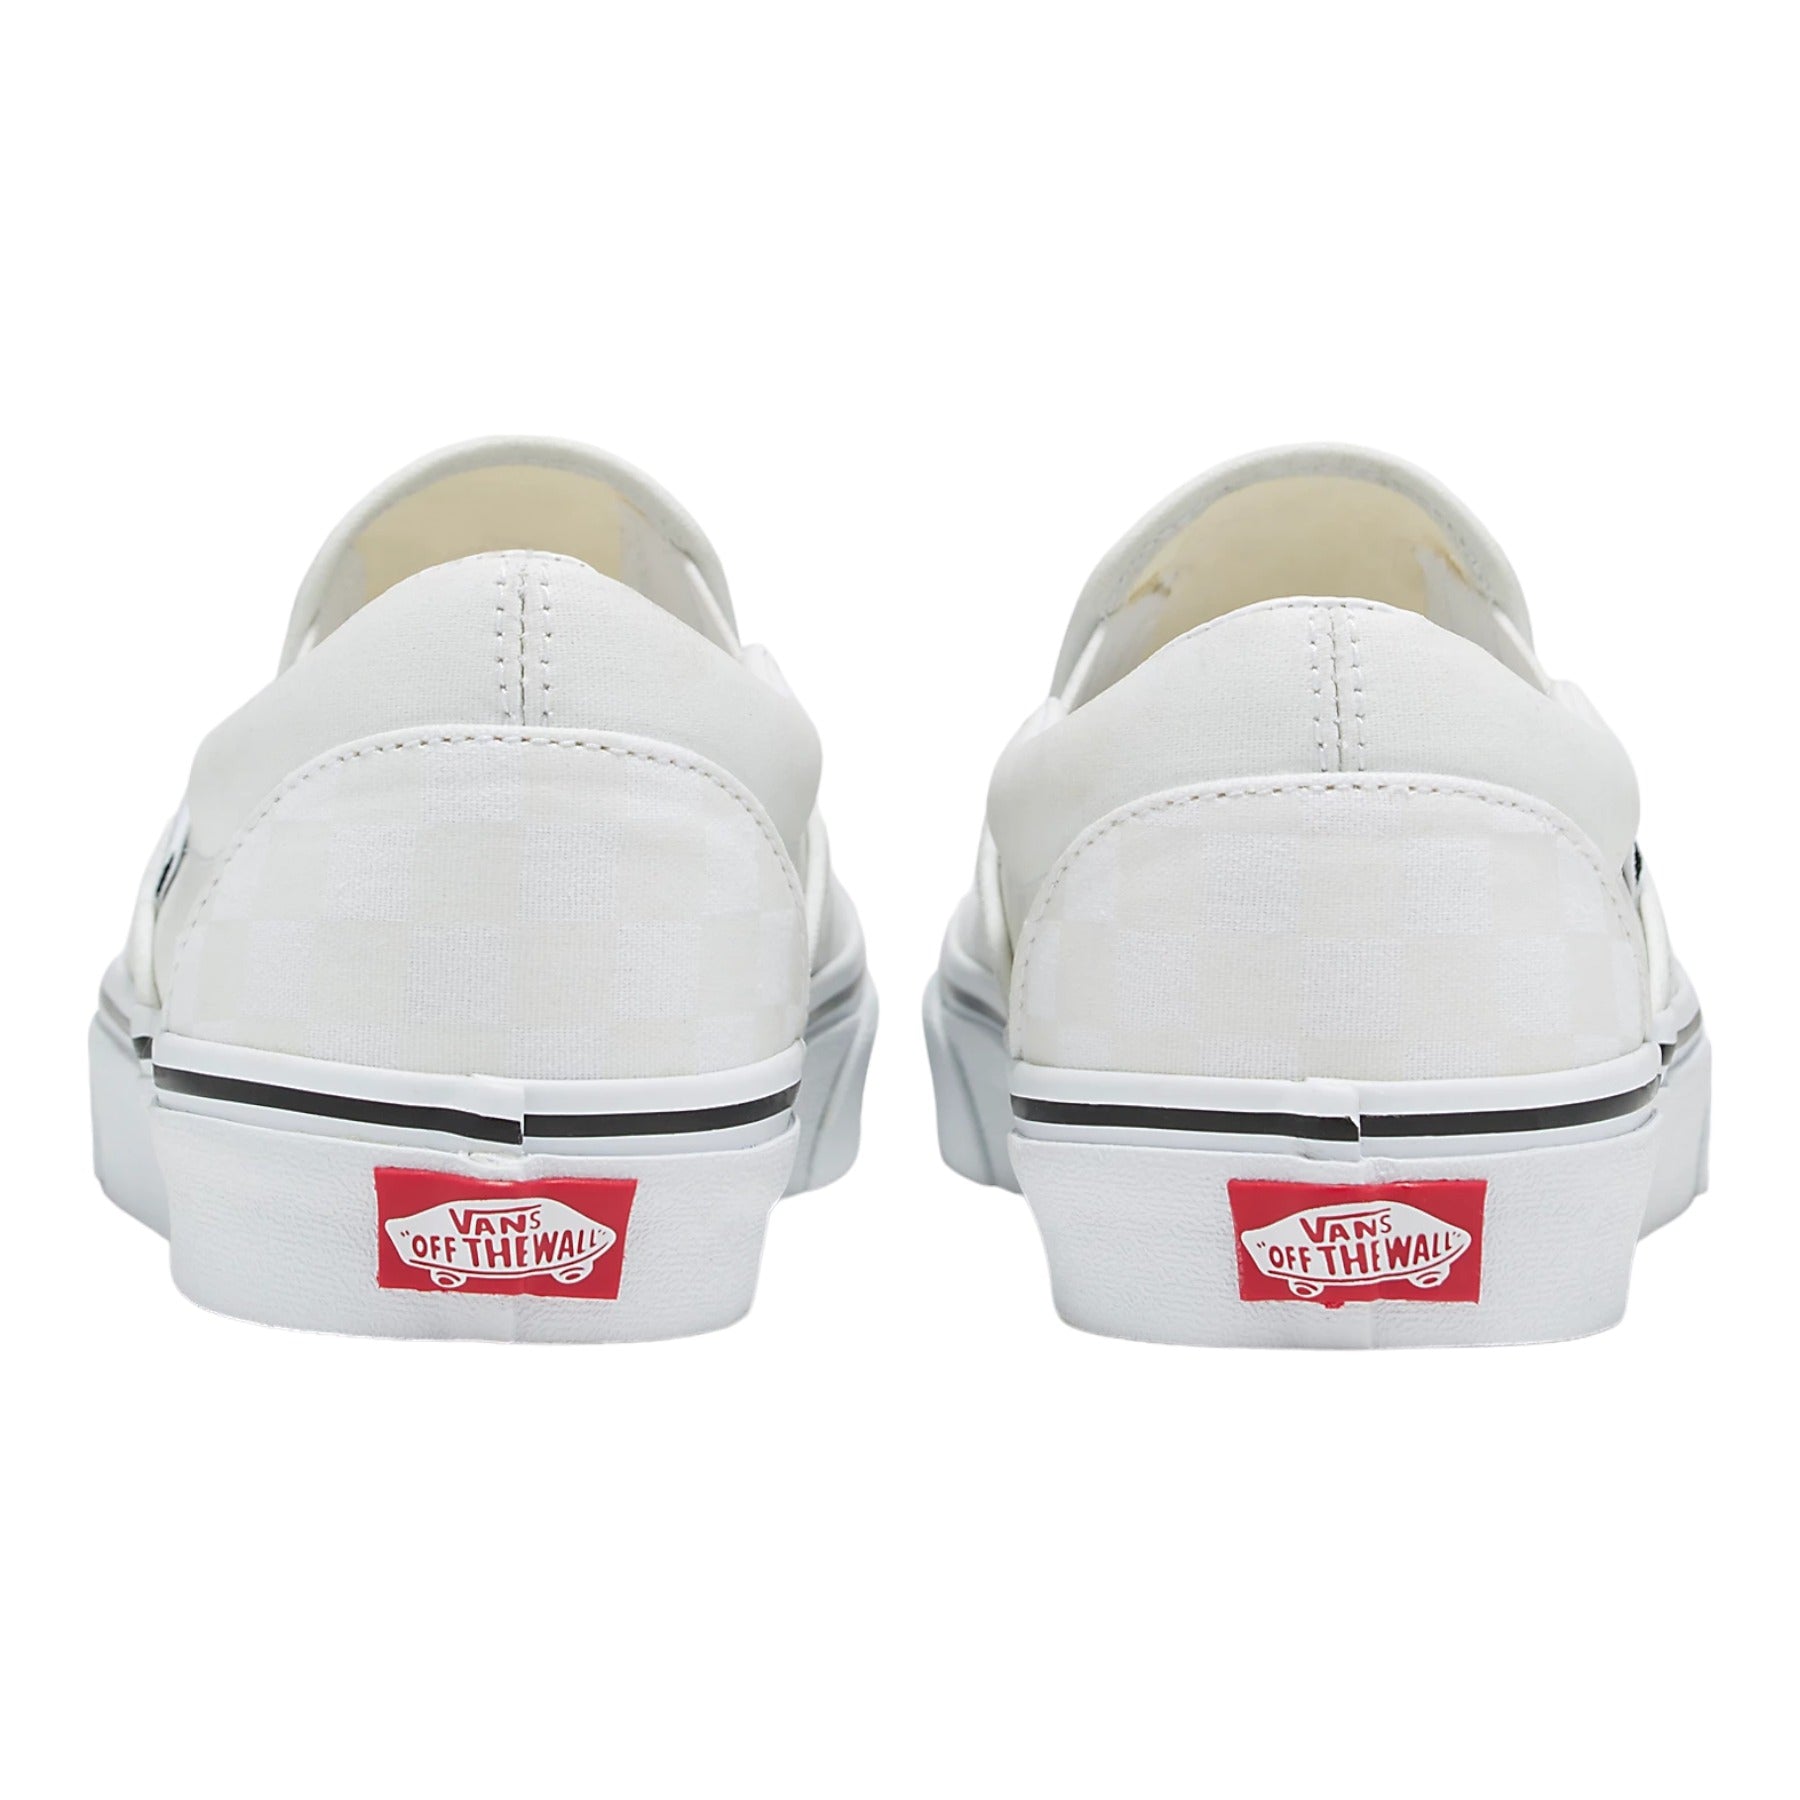 Vans Classic Slip-On Shoes - Glow Checkerboard